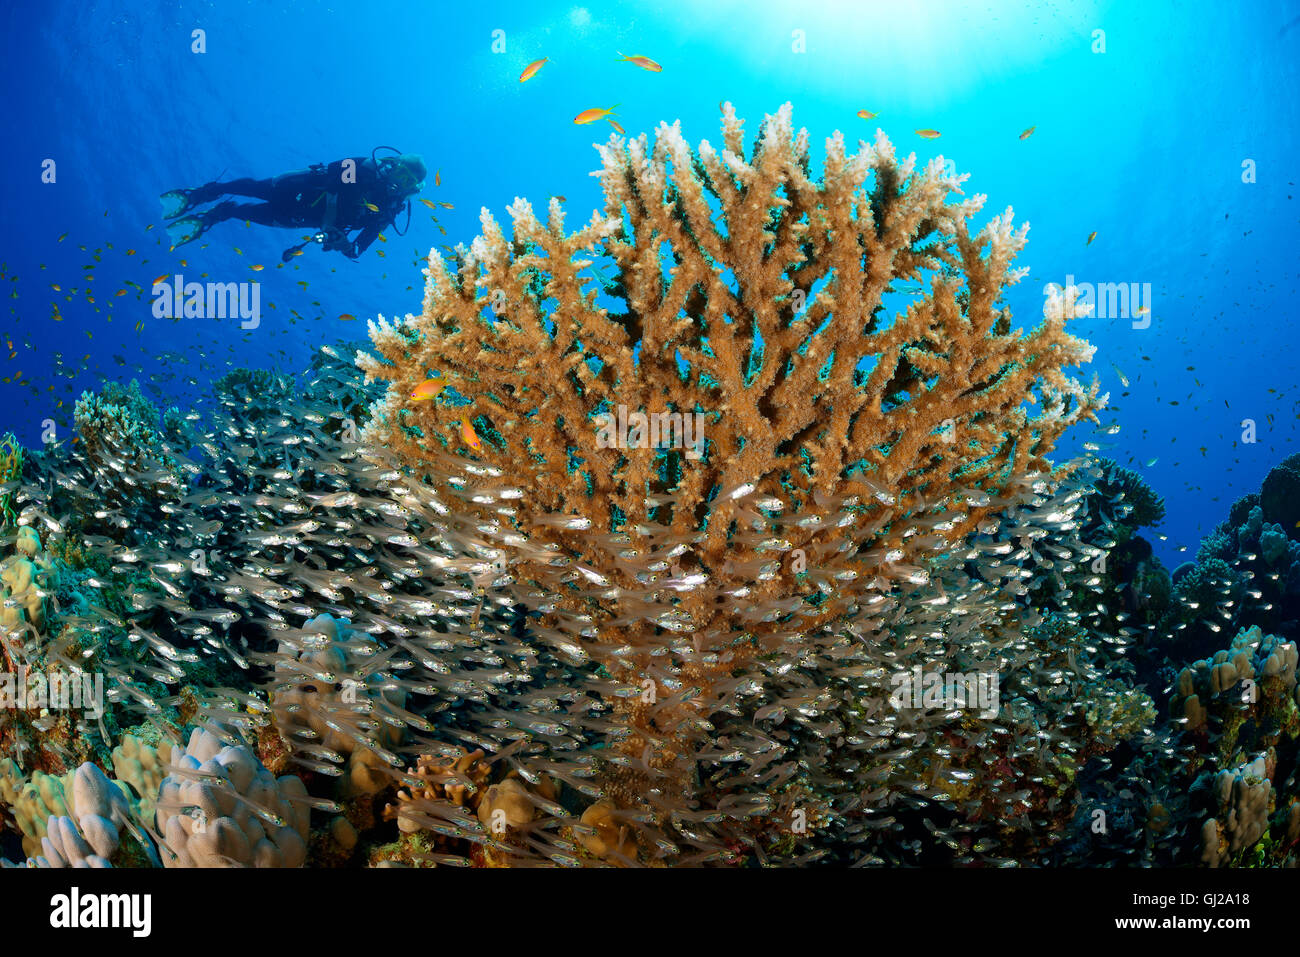 Parapriacanthus guentheri Acropora sp., scuba diver with table coral and school of glassfish, Safaga, Red Sea, Egypt, Africa Stock Photo